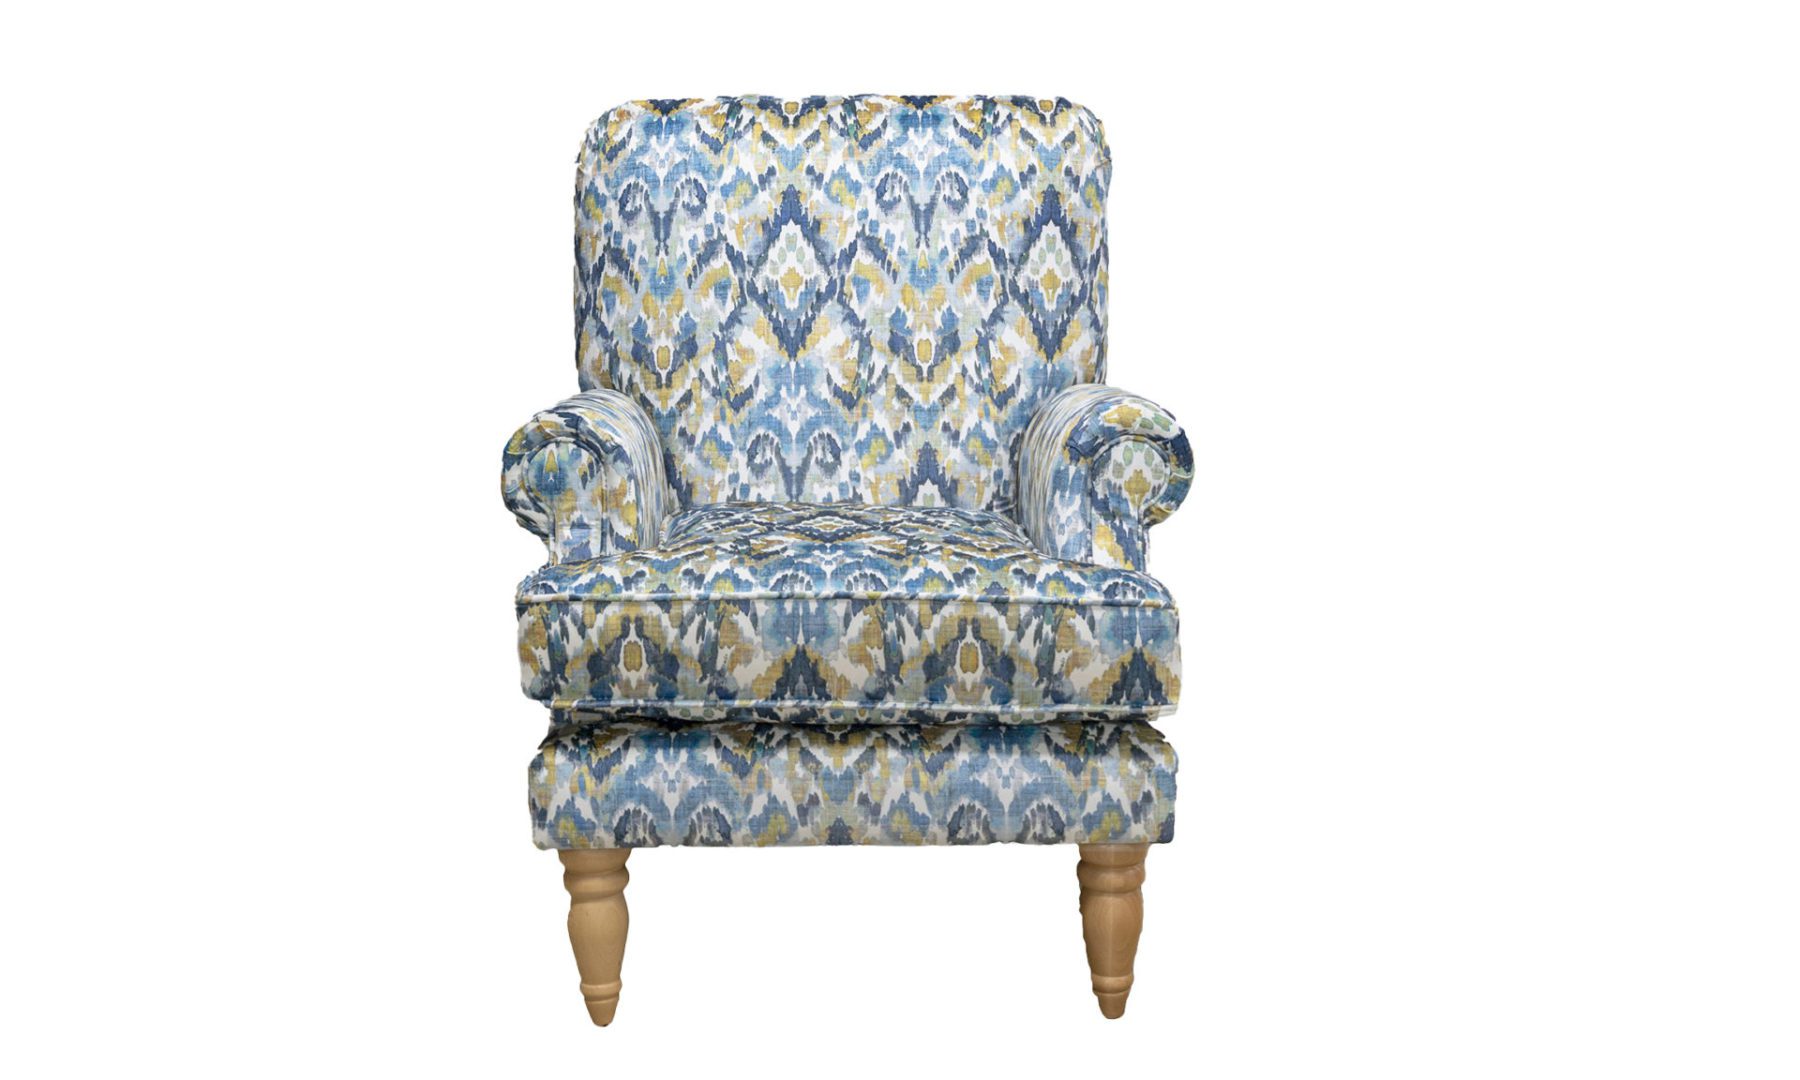 Cleary Chair in Monet Winter, Platinum Collection Fabric